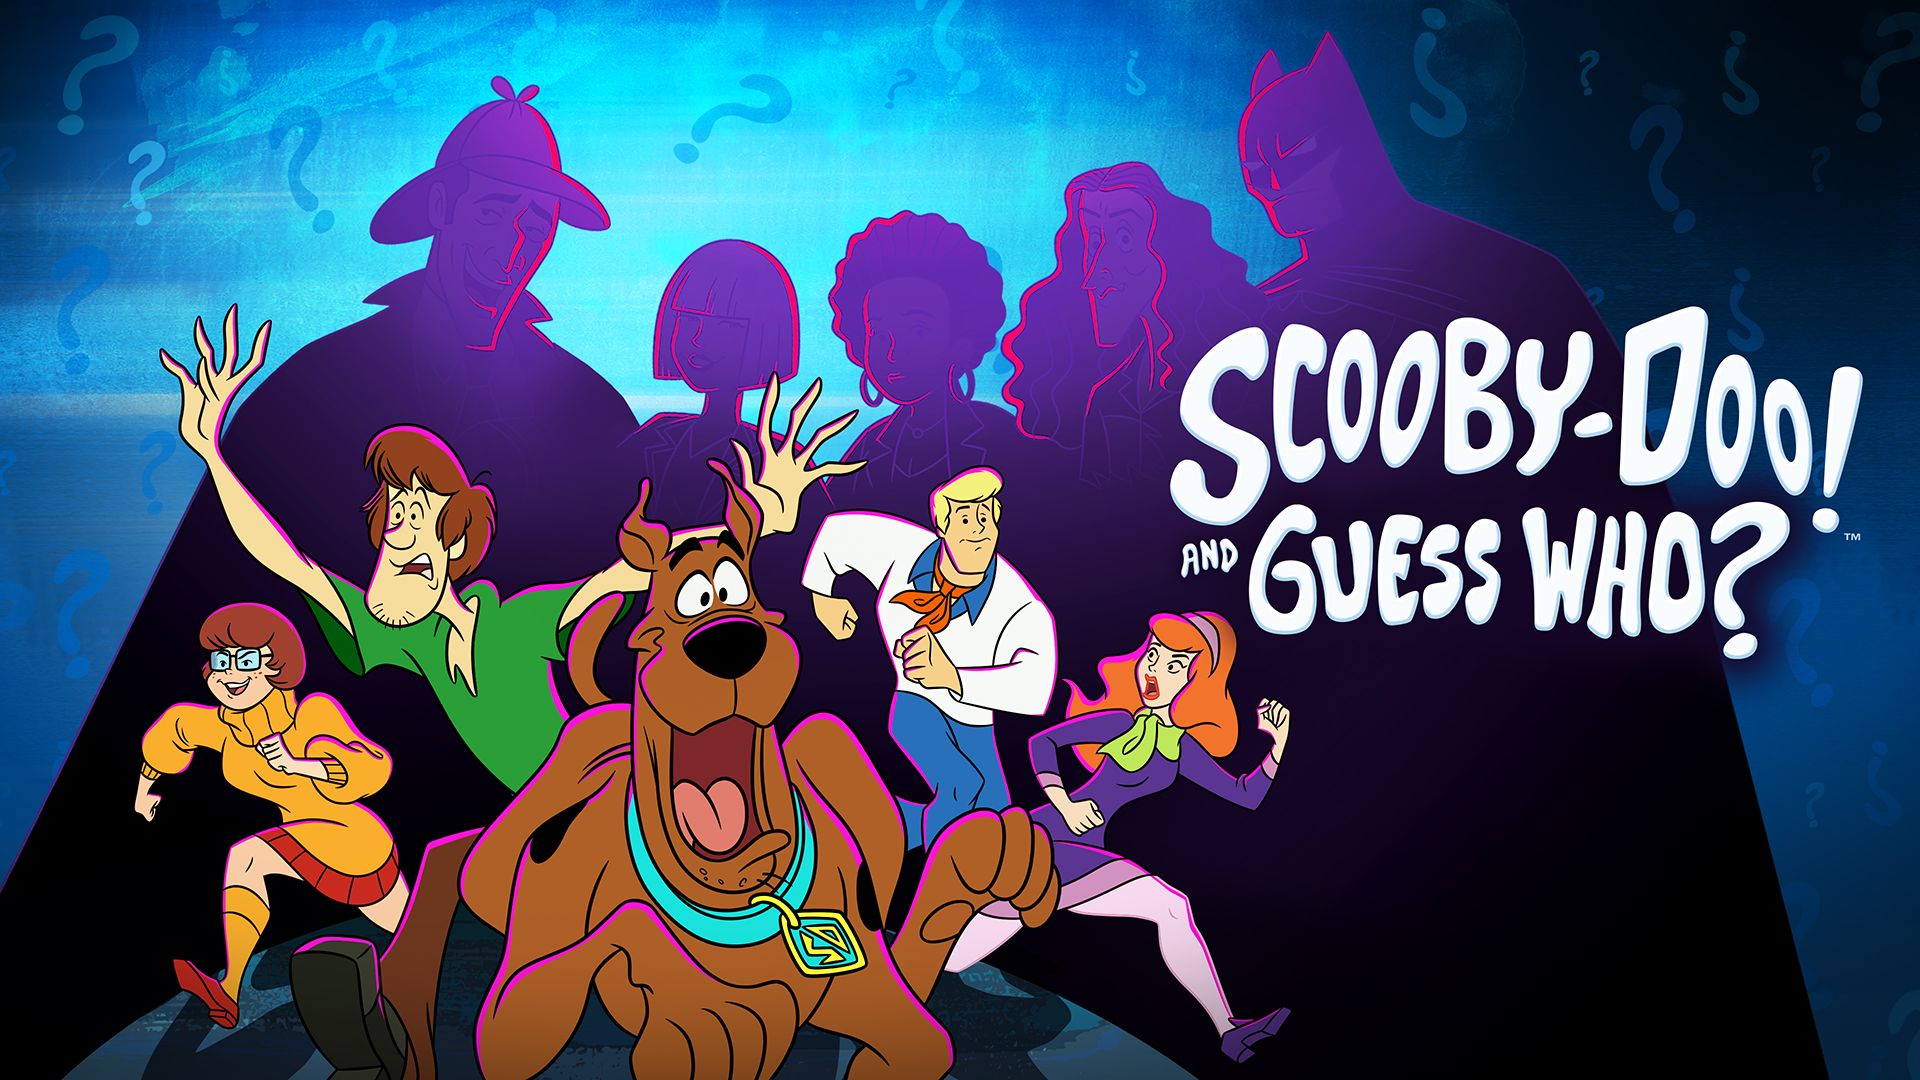 Virgin Media Store | Scooby-Doo and Guess Who?